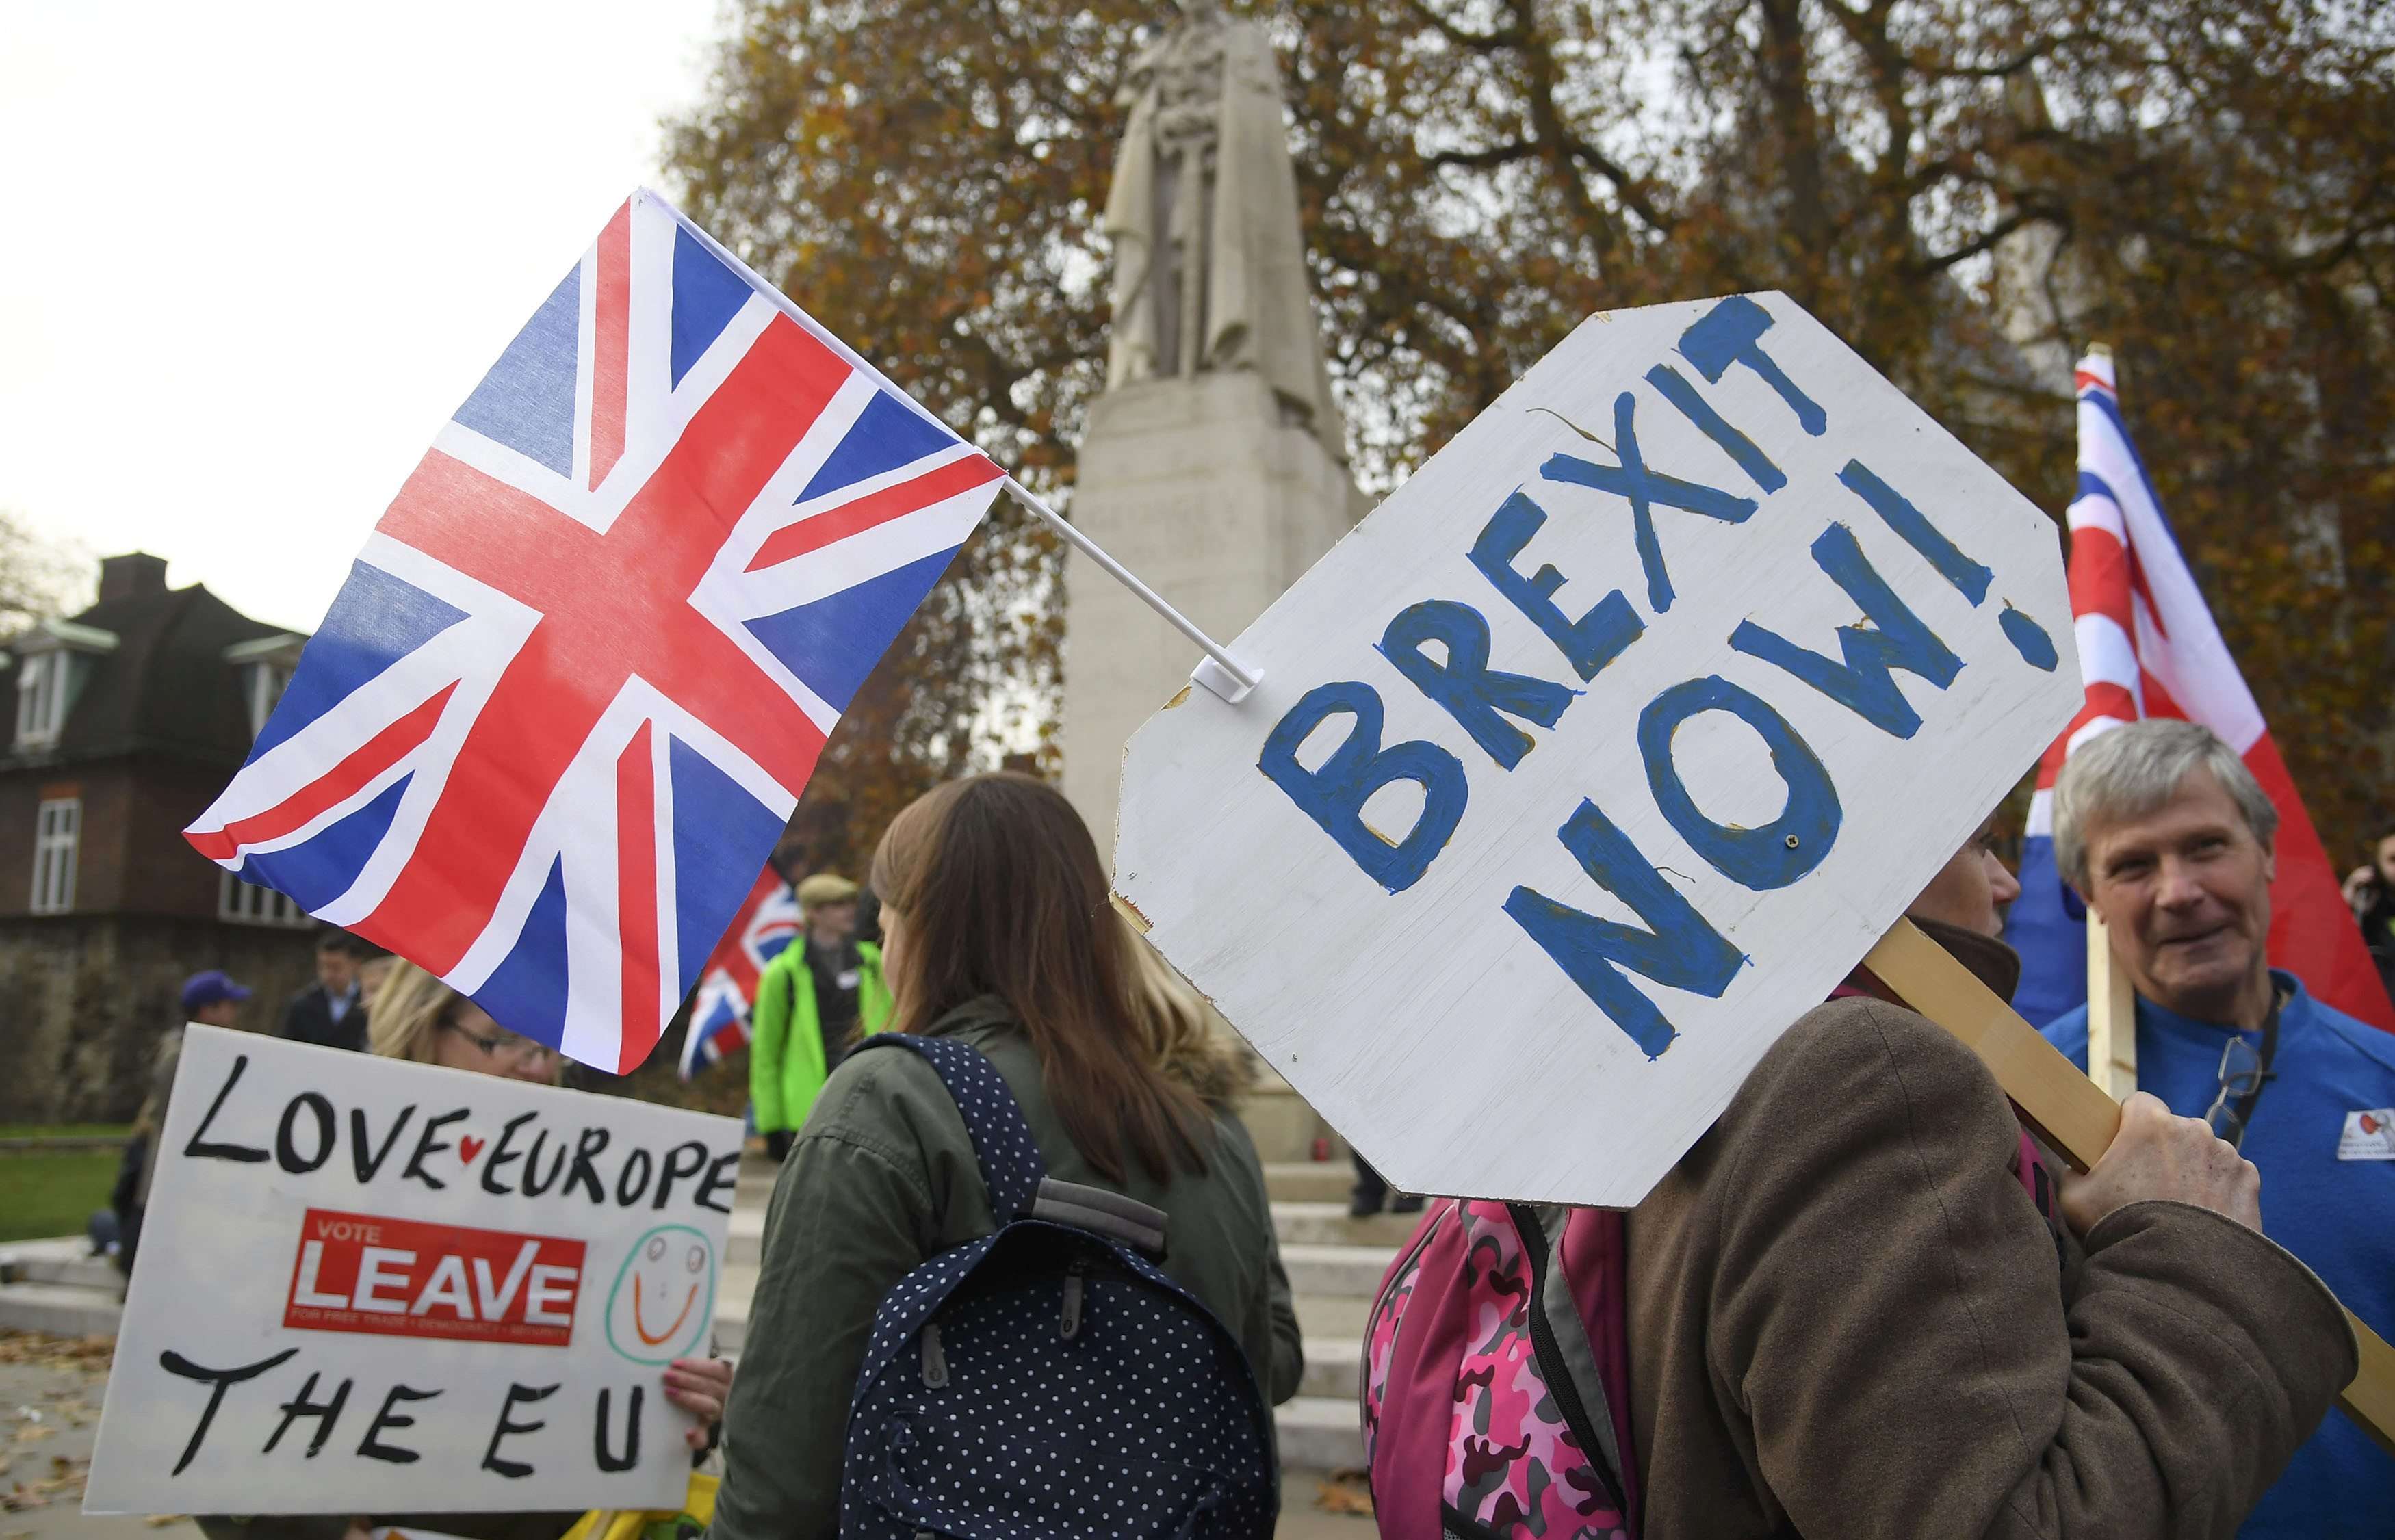 Demonstrators supporting Brexit protest outside the Houses of Parliament in London. Photo: Reuters